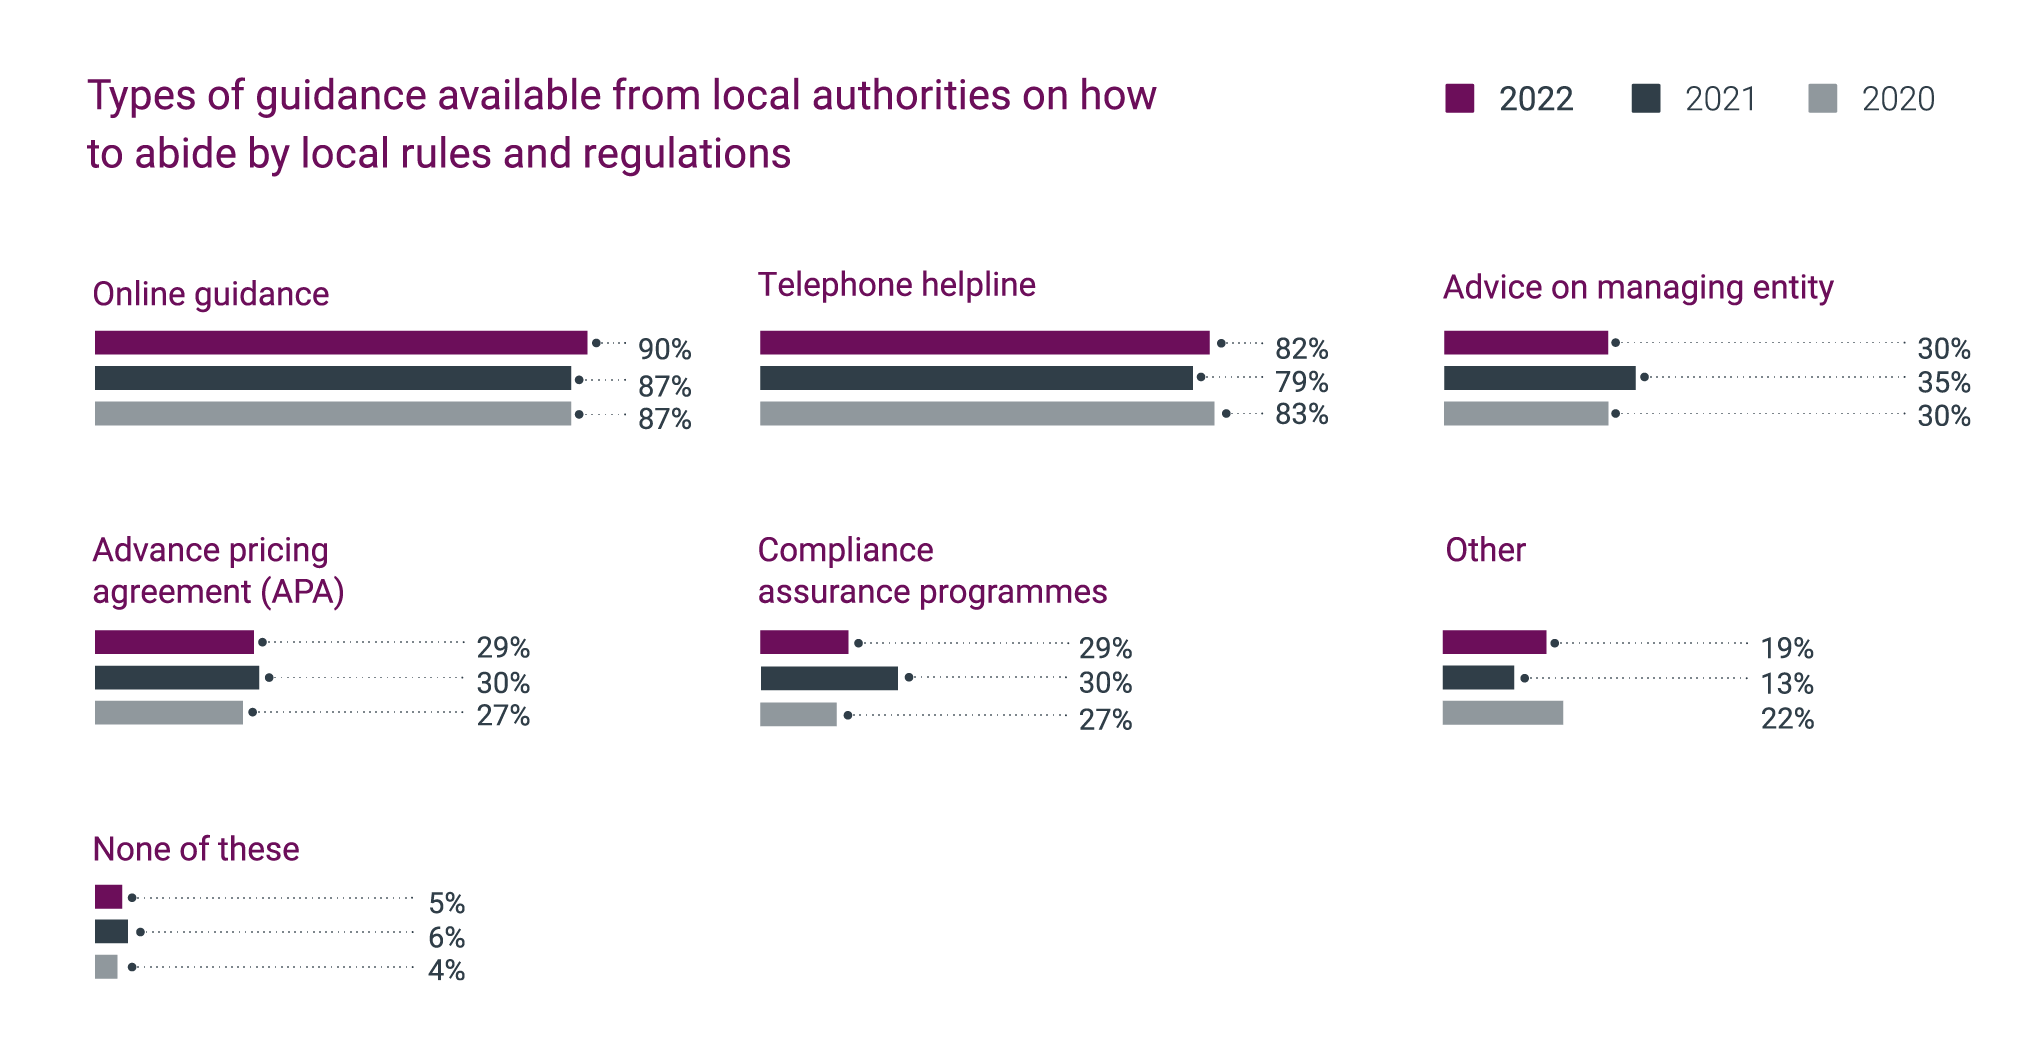 Types of guidance from local authorities